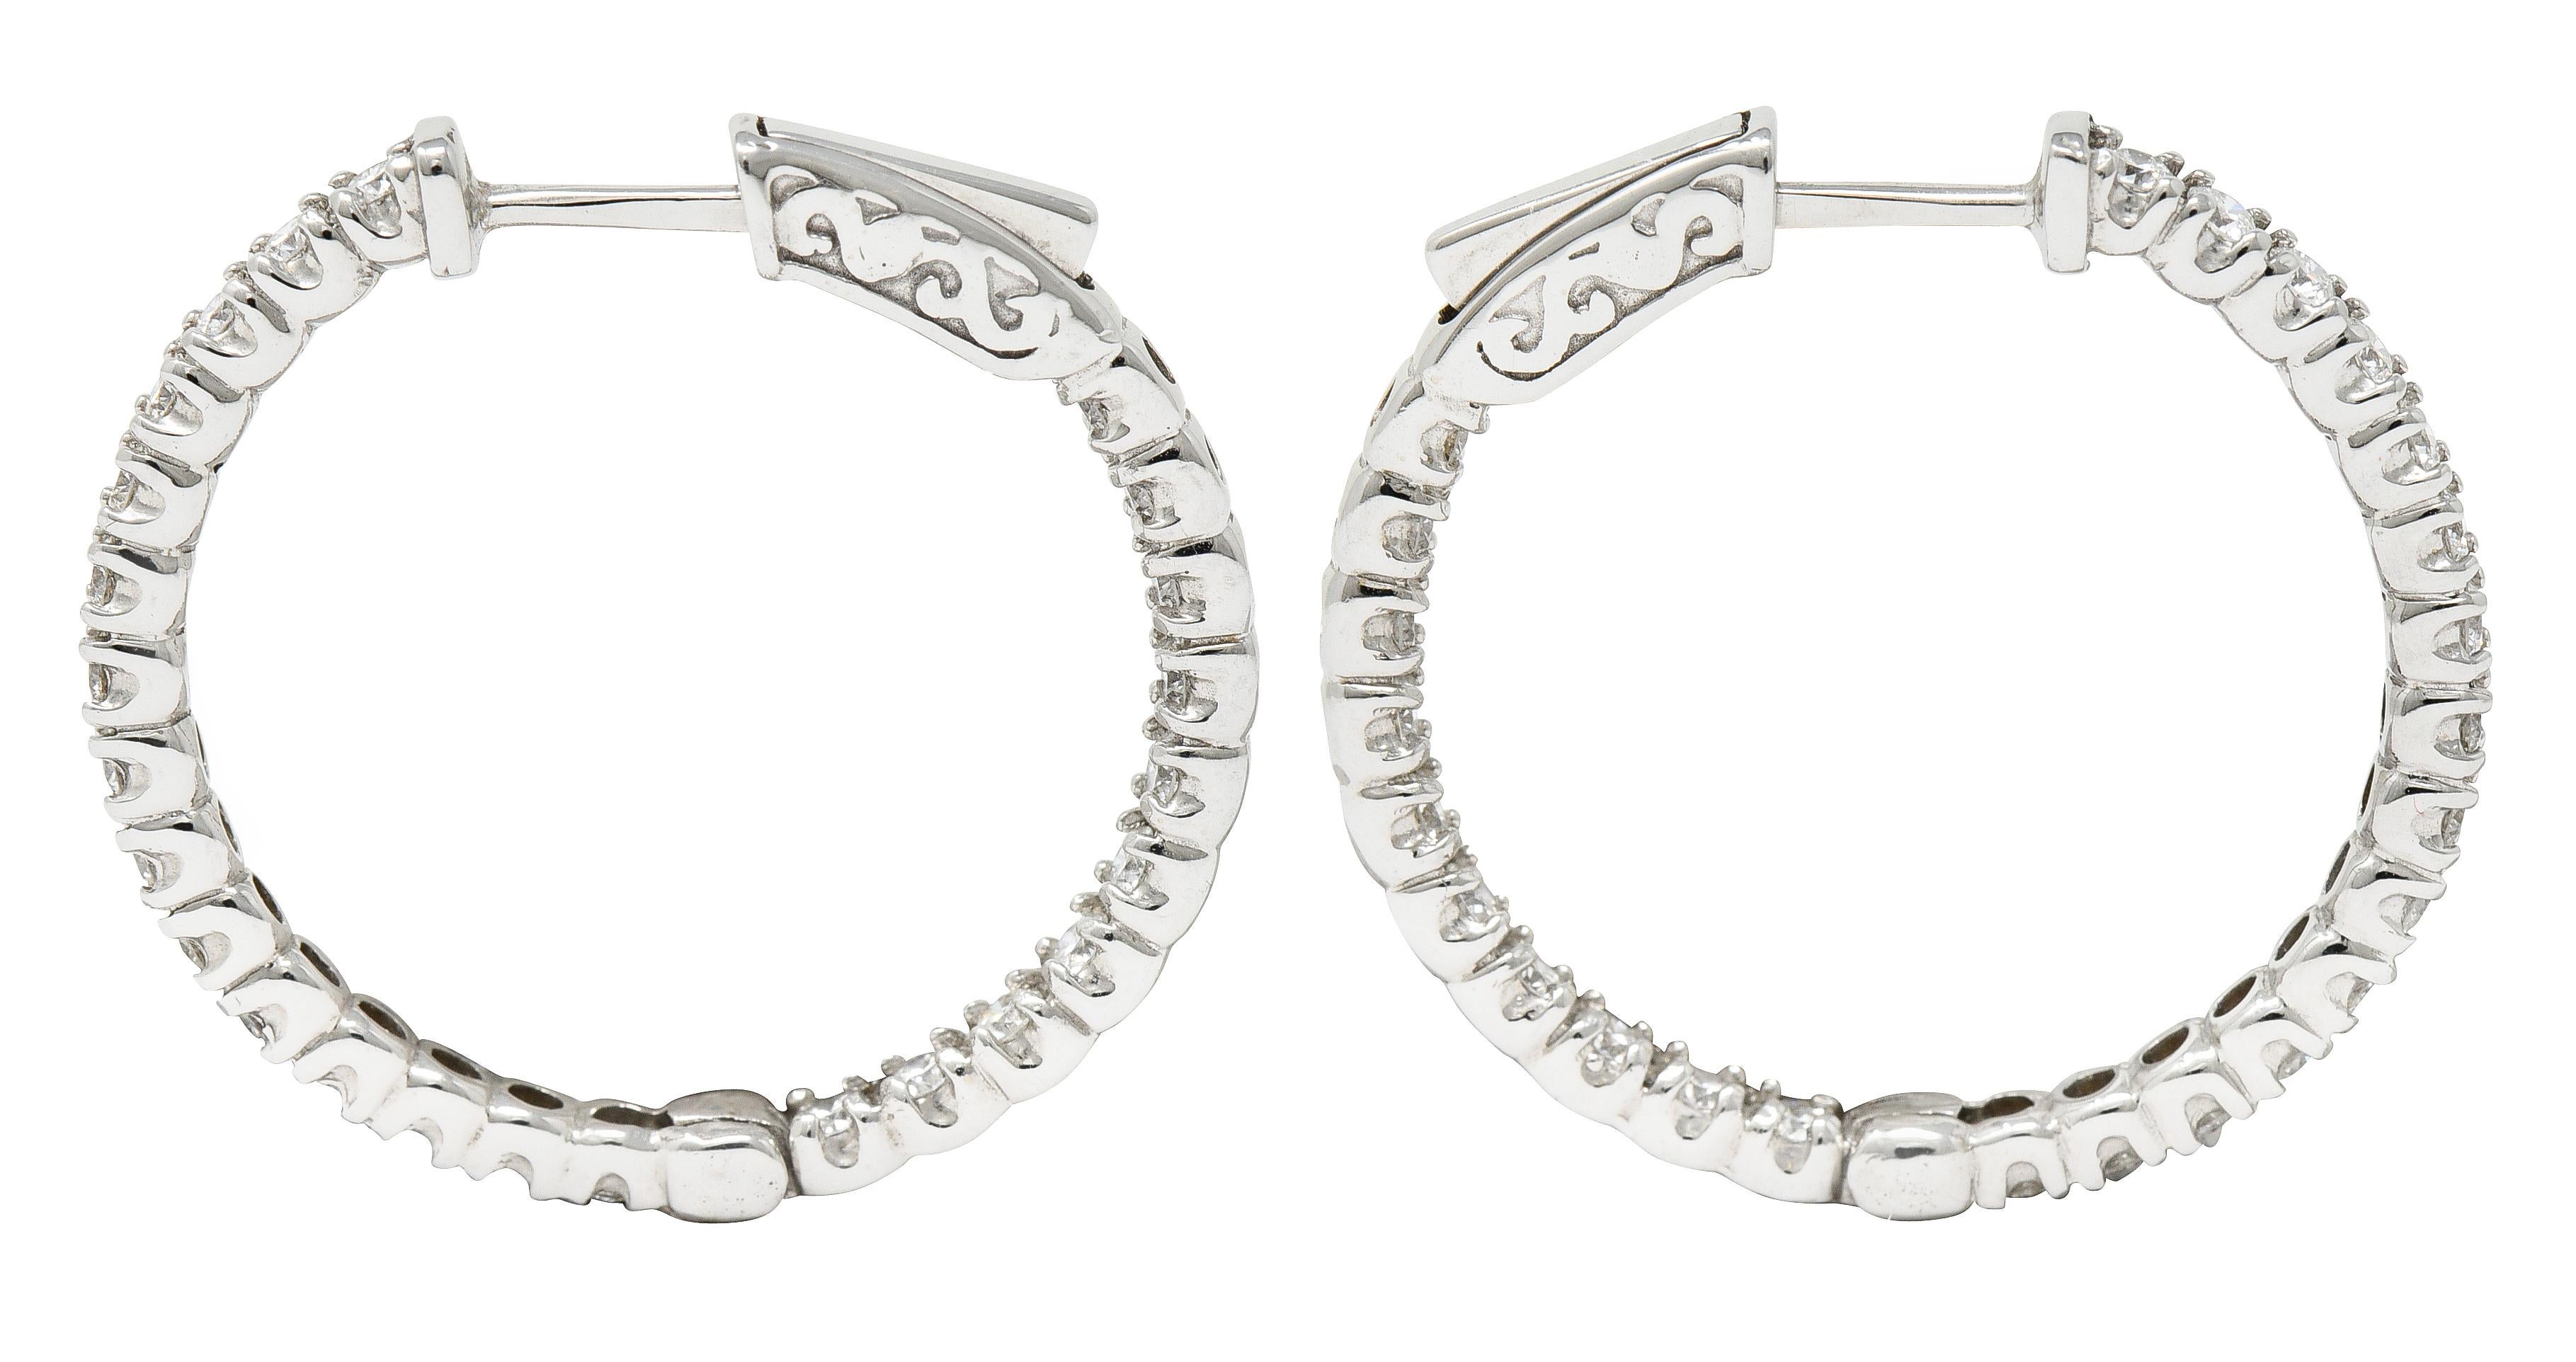 Inside/outside style huggie hoop earrings

With individually set round brilliant cut diamonds

Weighing in total approximately 1.50 carats - G/H color with overall VS clarity

Opens on a hinge via presser revealing posts

Inscribed with carat